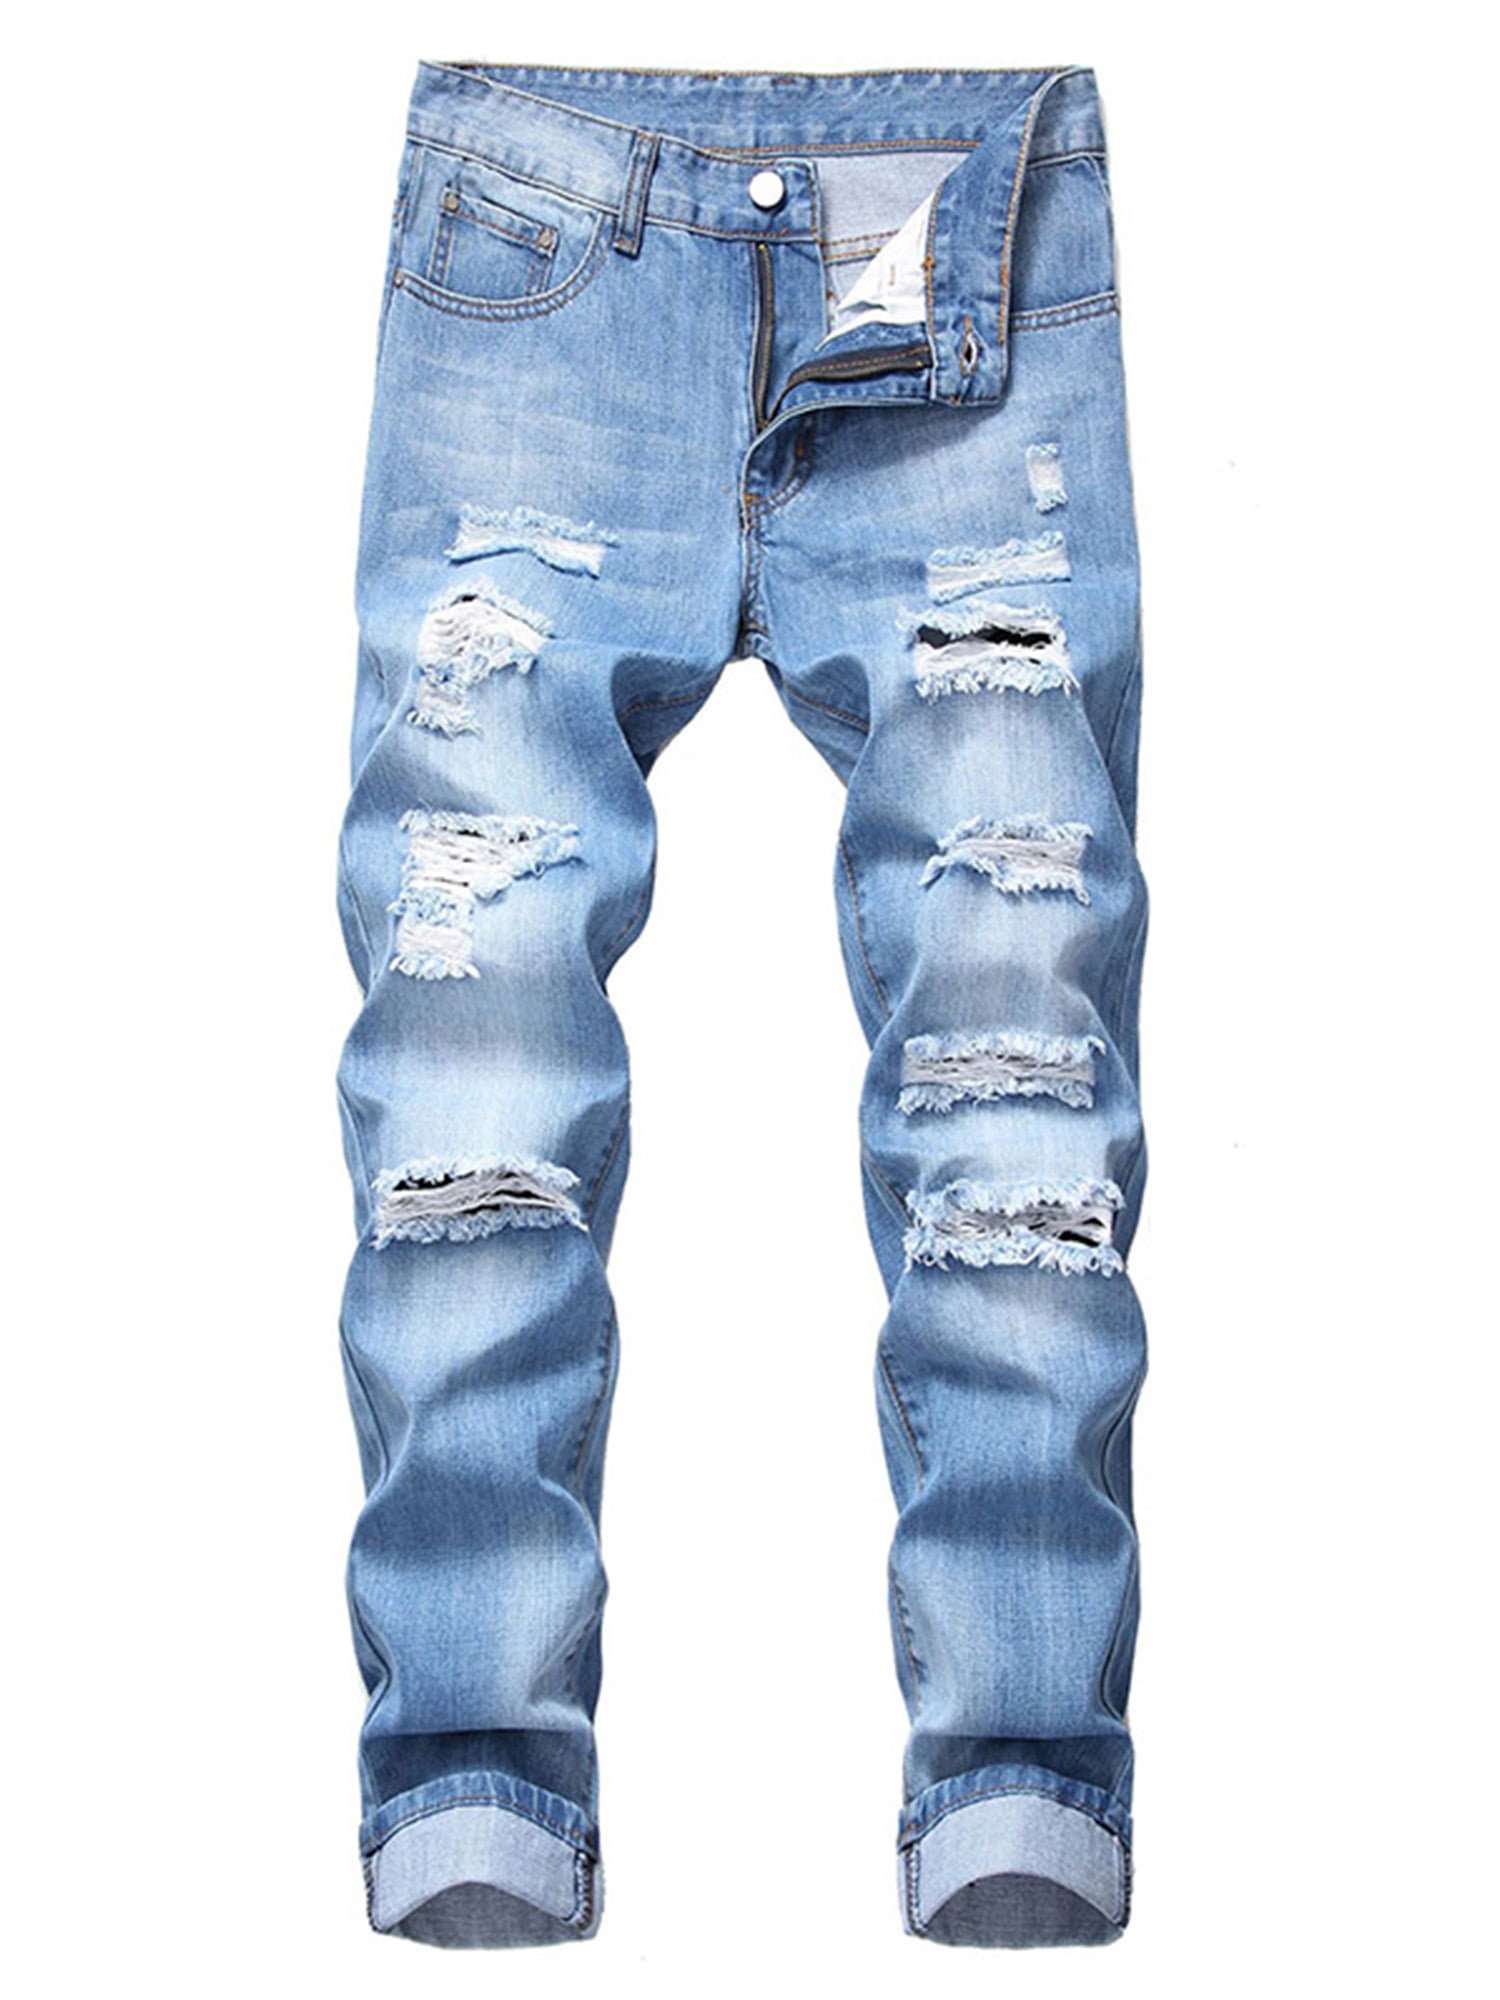 Fashion Mens Ripped Jeans Slim Fit Straight Casual Vintage Pants with Holes - Walmart.com